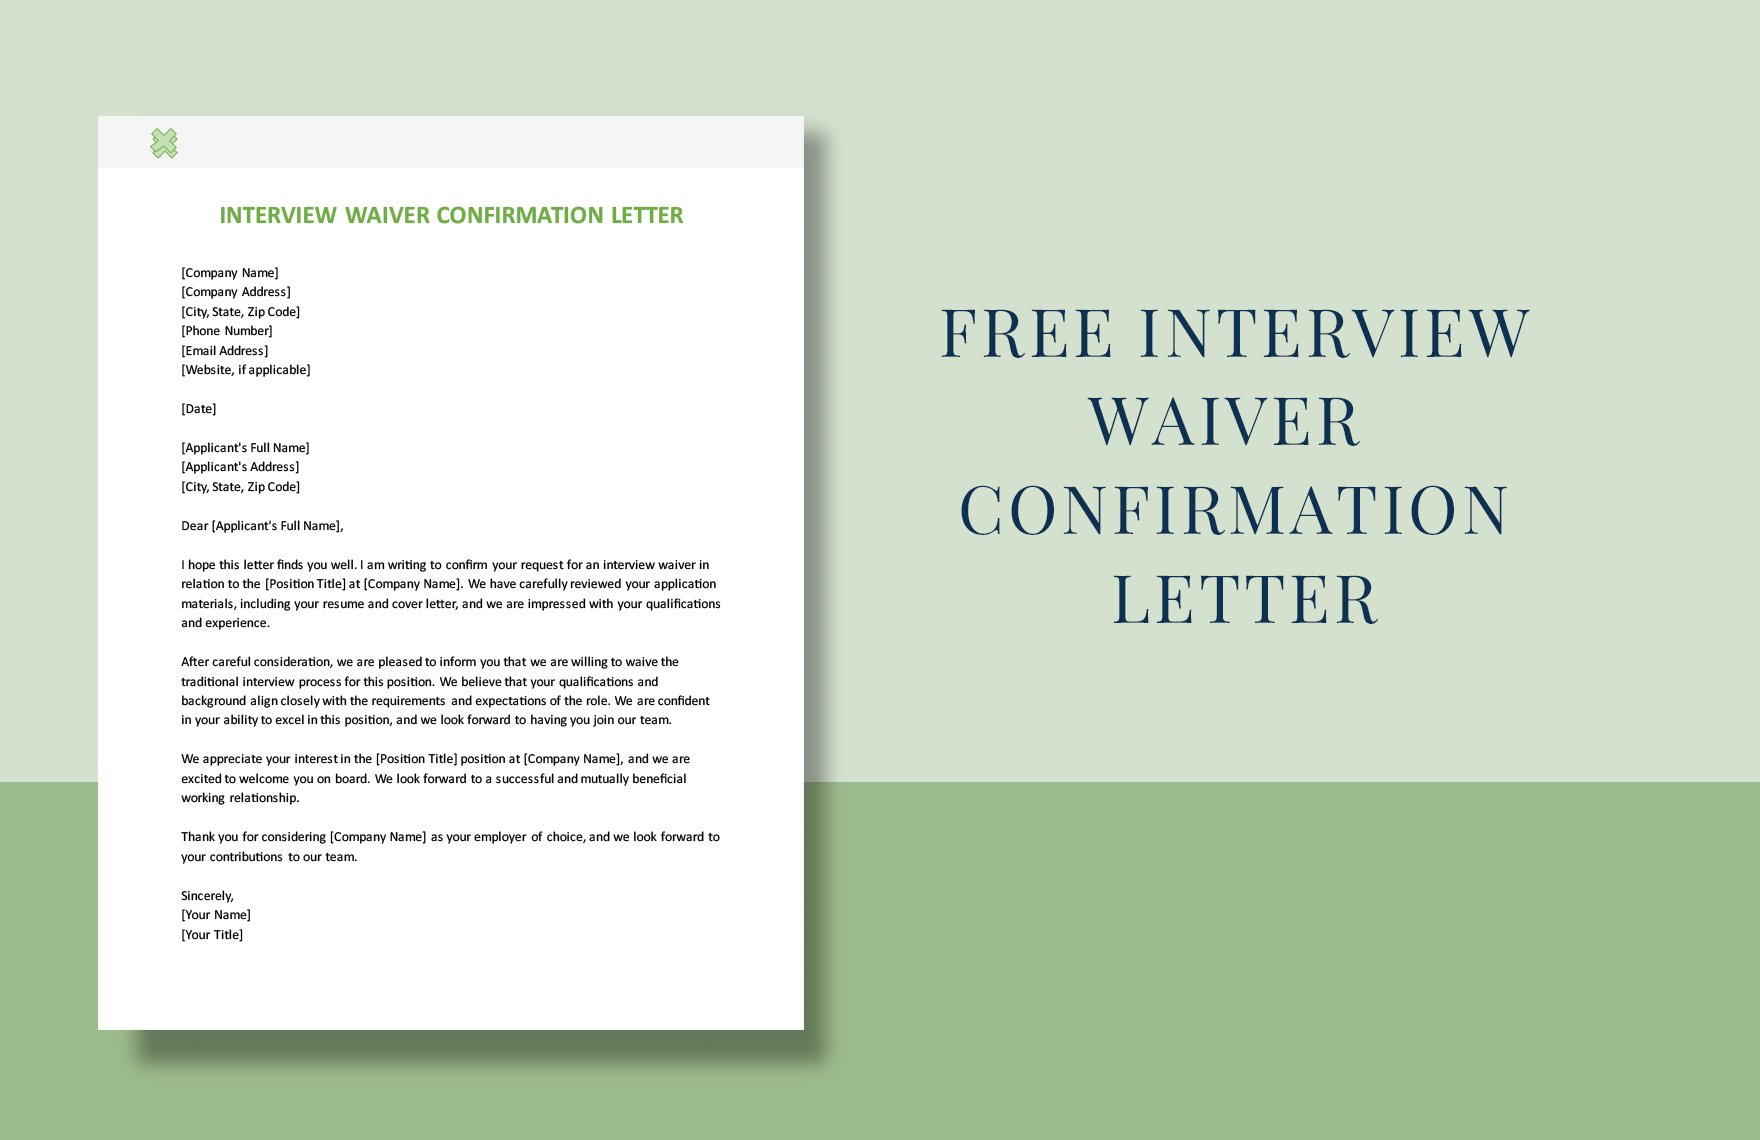 Free Interview Waiver Confirmation Letter